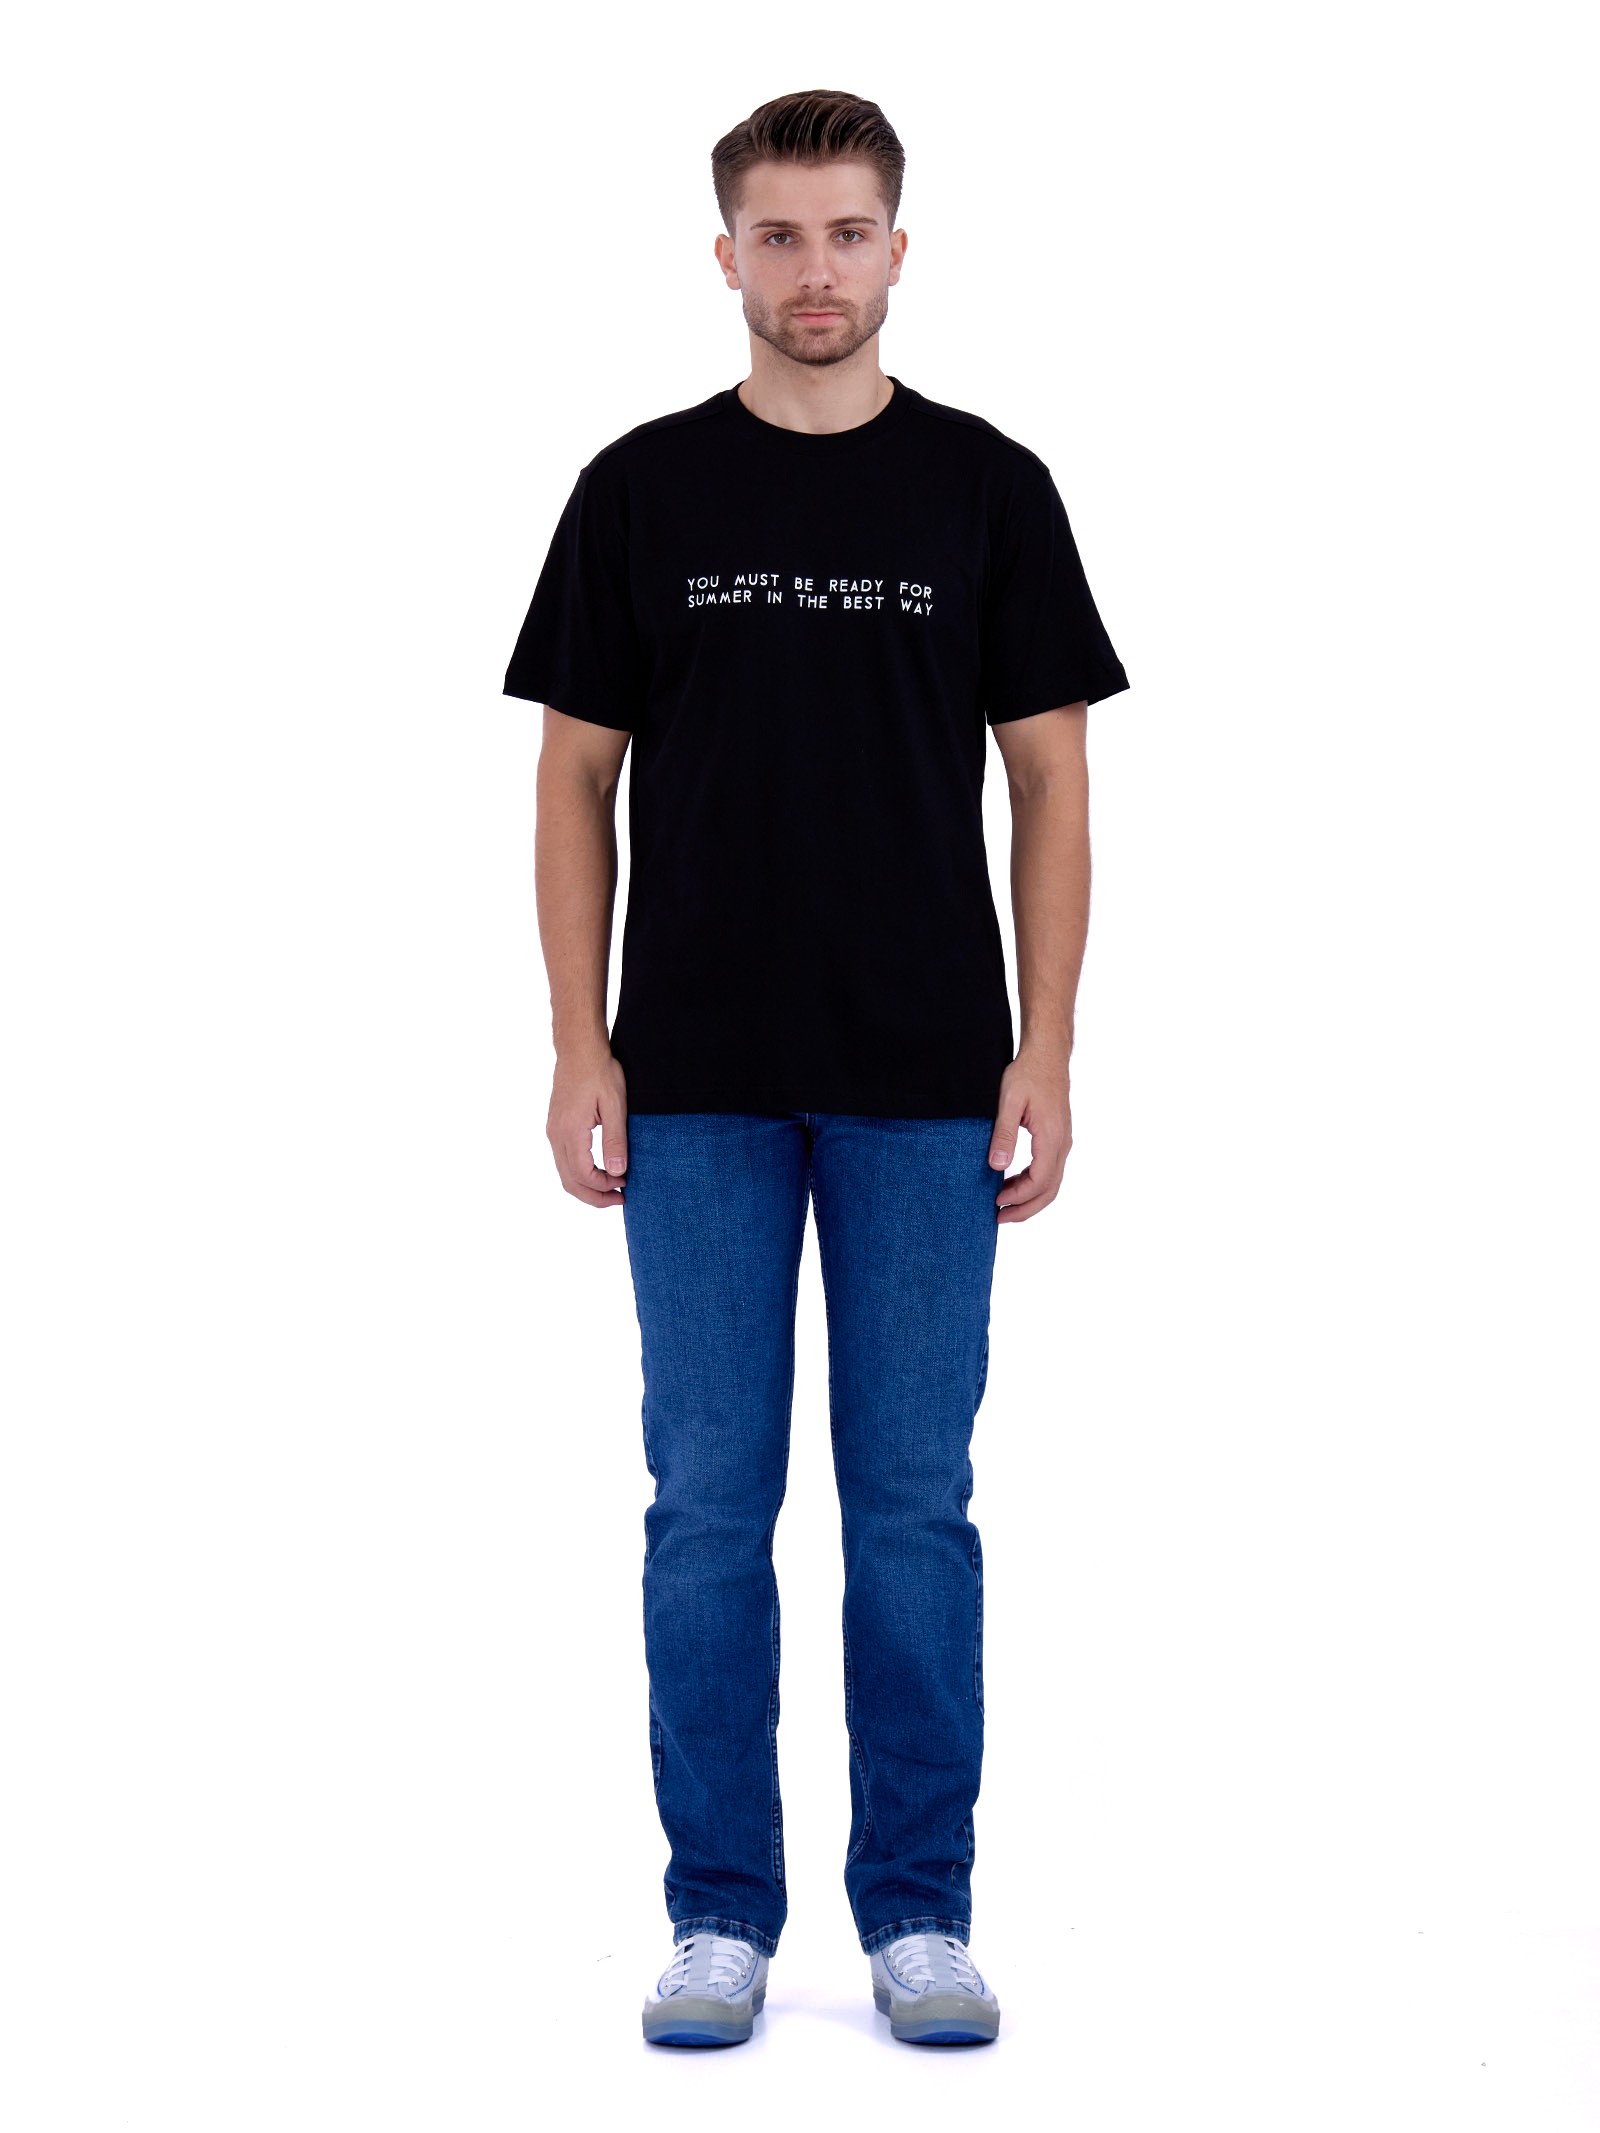 Black Supreme T-Shirt with quote